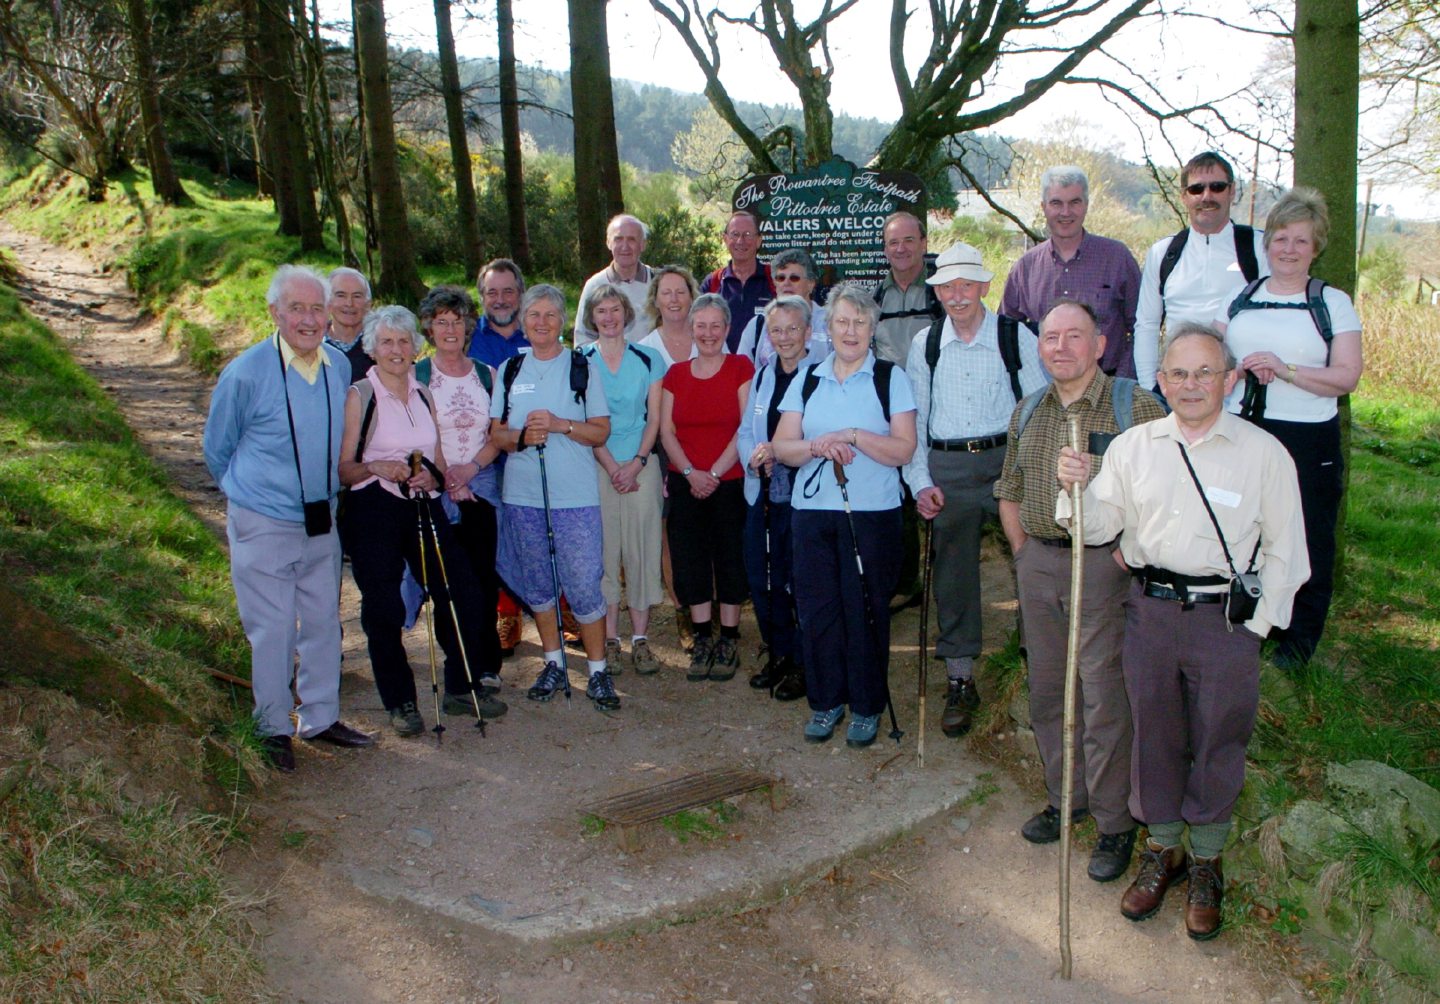 The 50th year reunion of members of the Inverurie Academy Outdoor Club